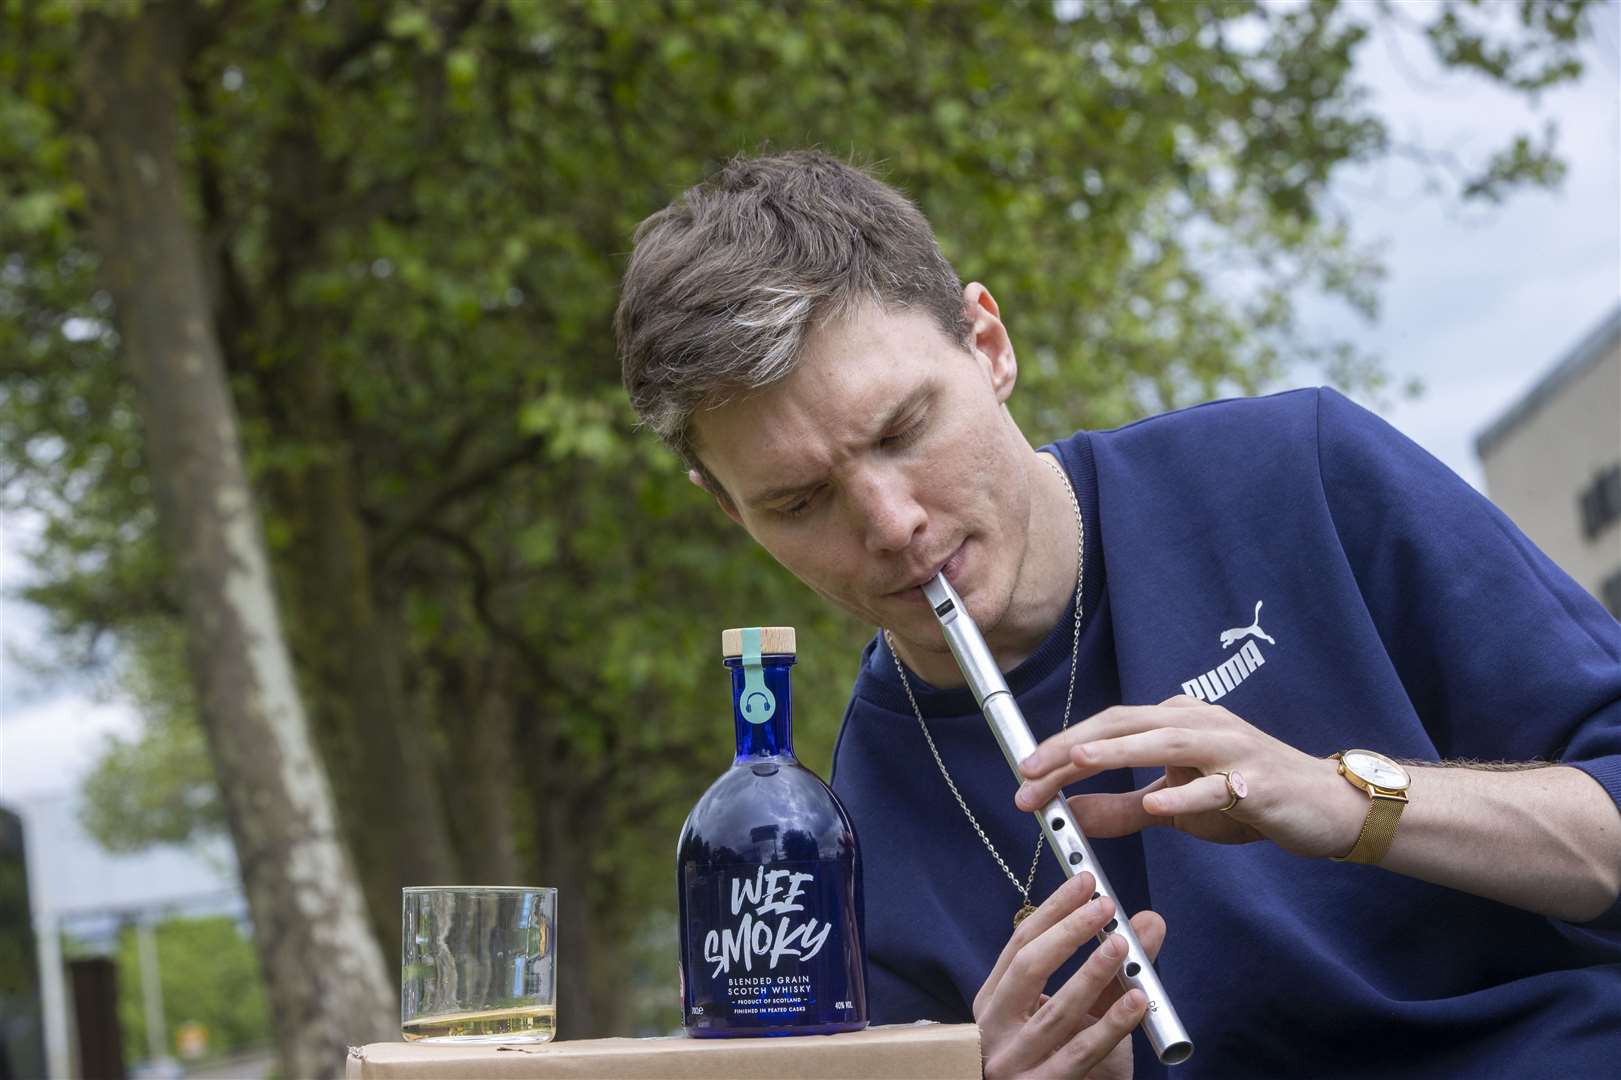 Ali Levack from Dingwall plays to a bottle of Wee Smoky.